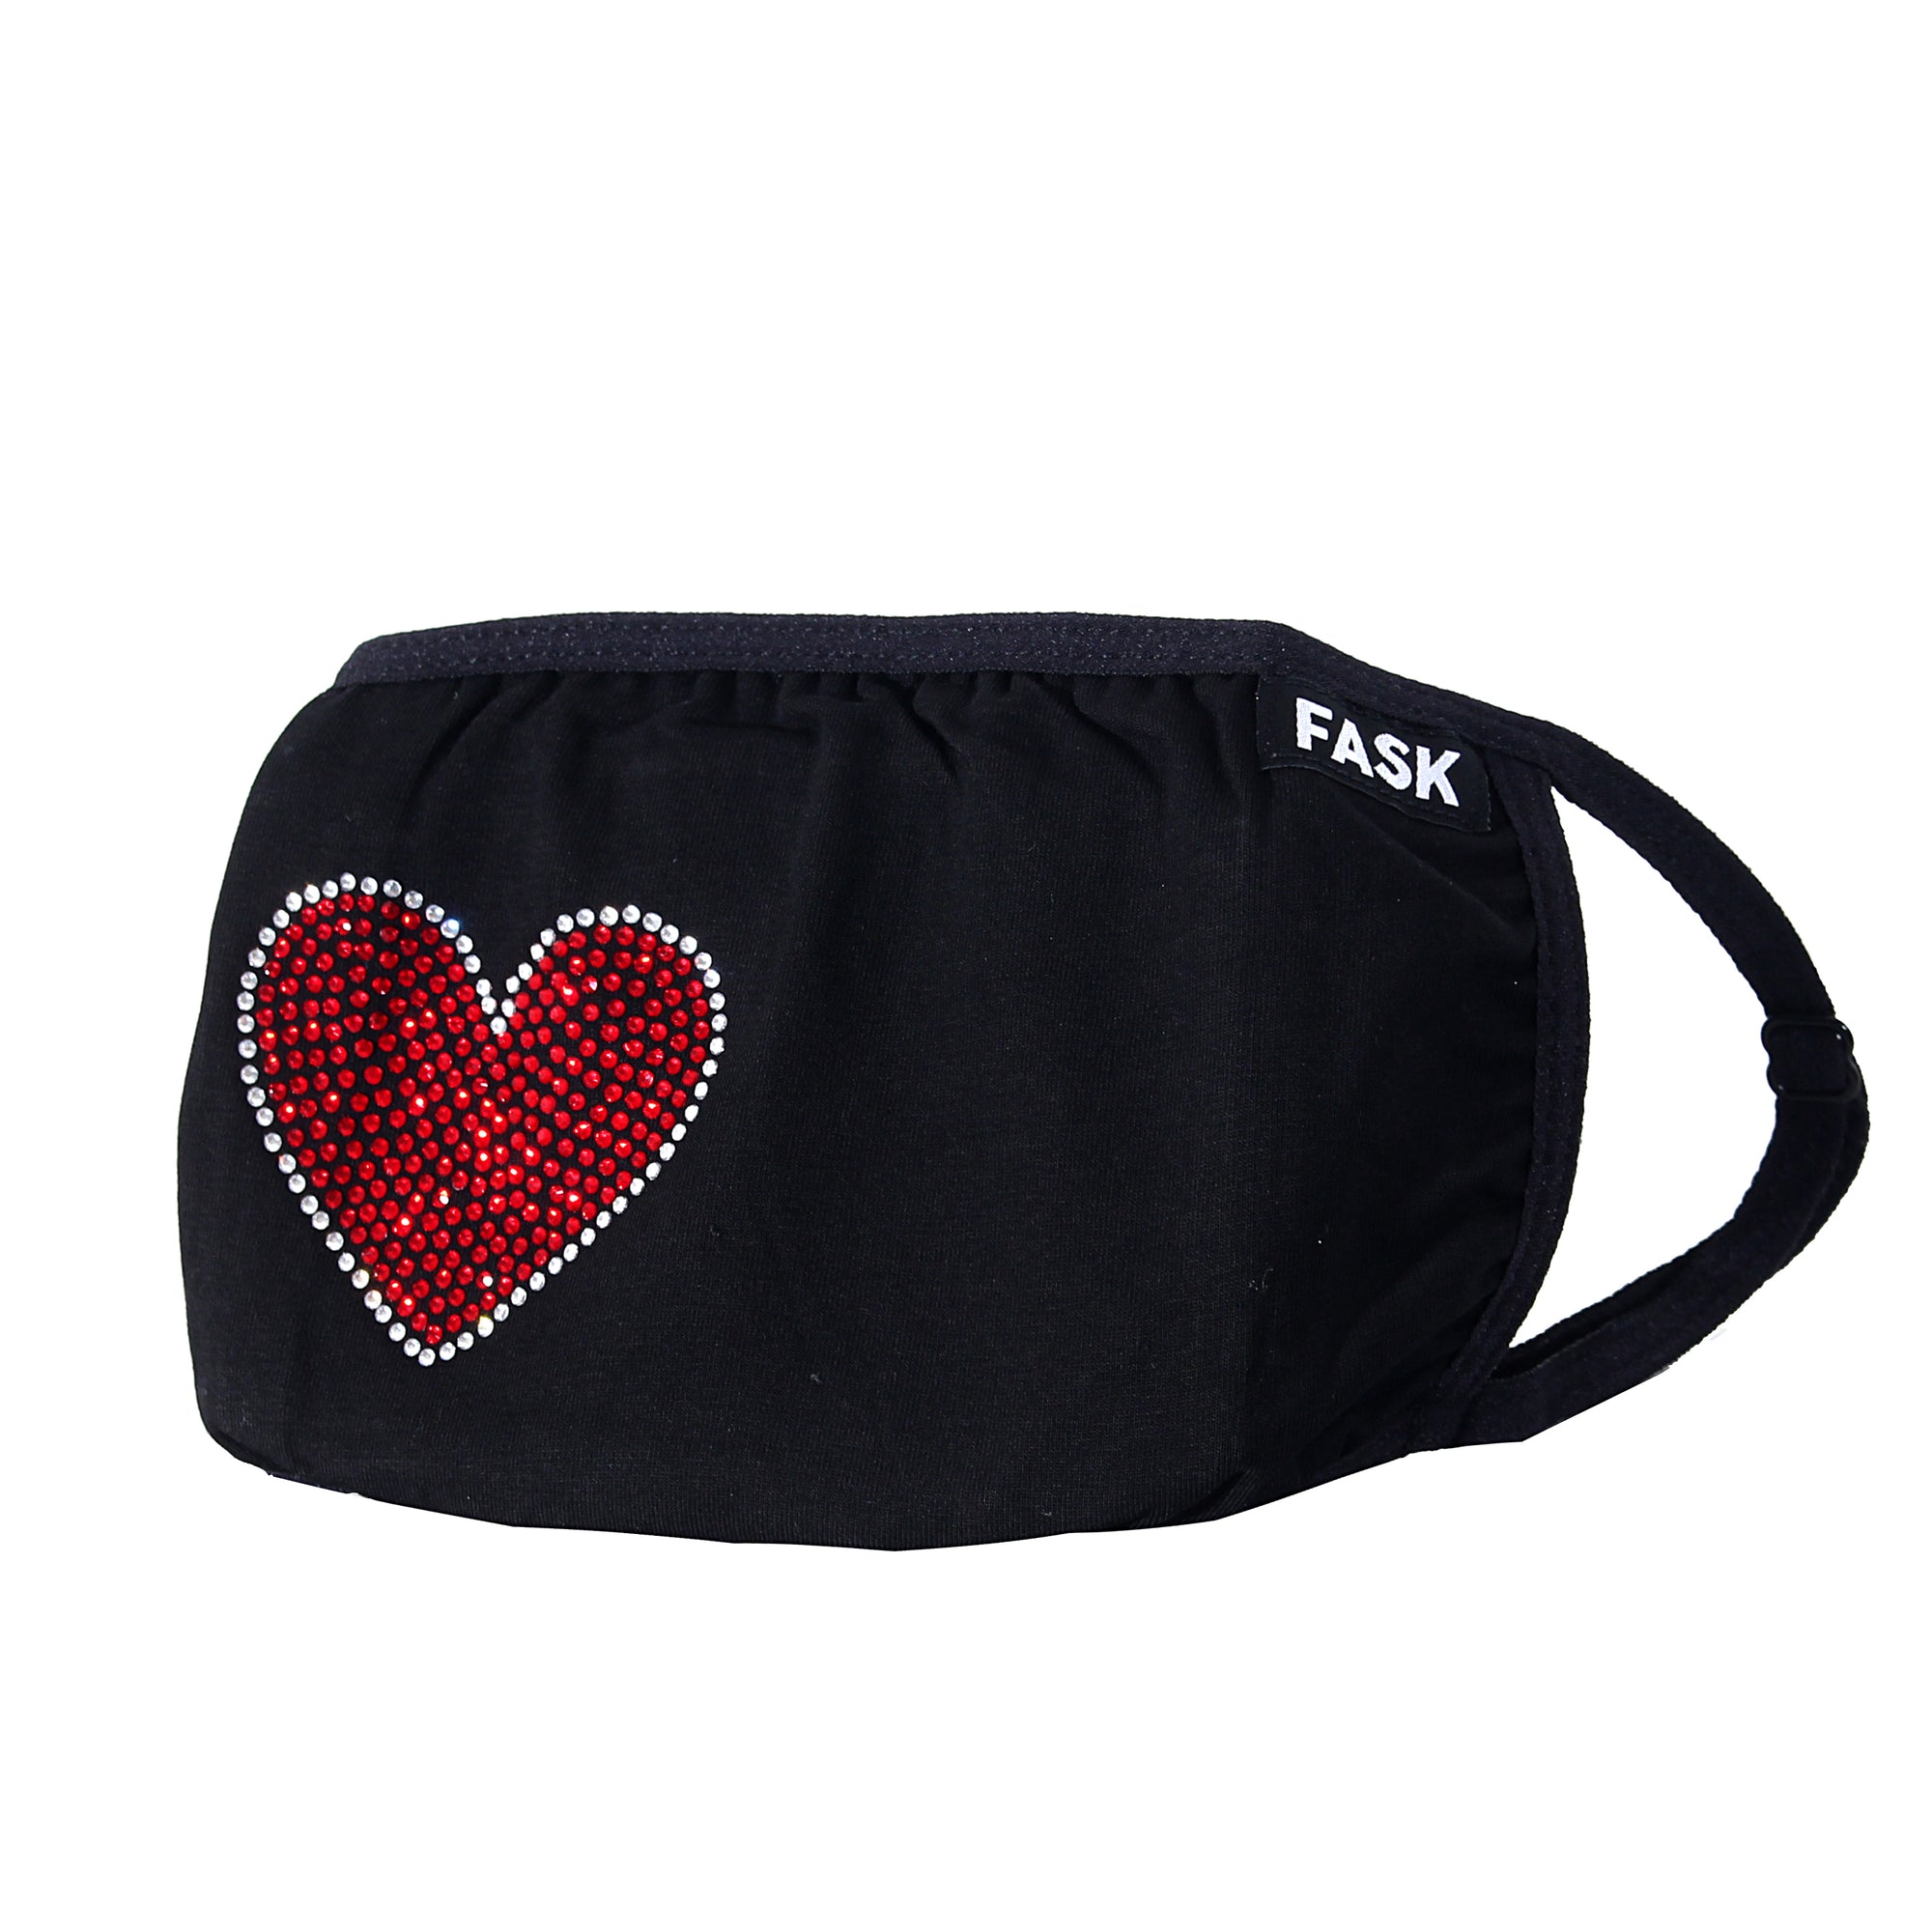 FASK Heart Cotton 2.0 Stoned Mask with Interchangeable Filter and Adjustable Size Strap